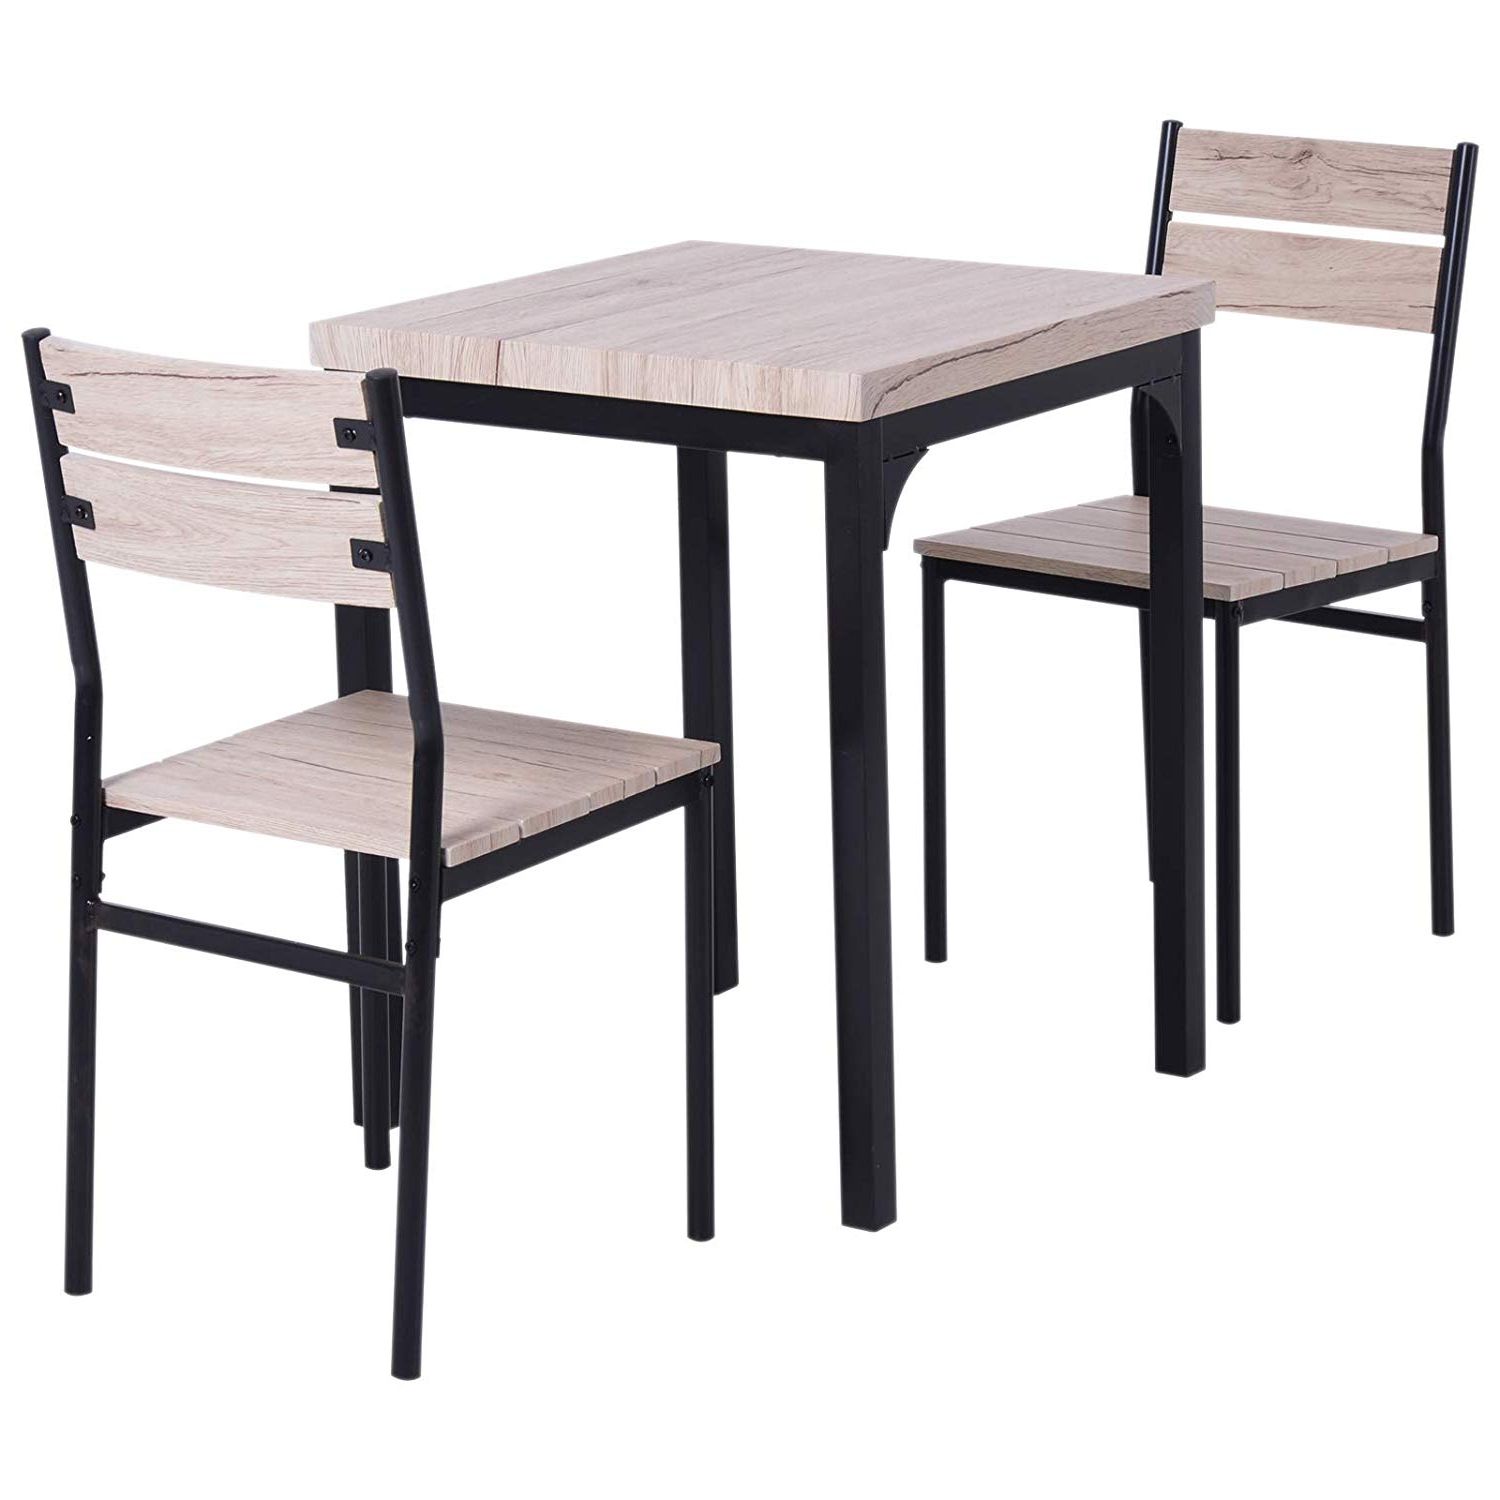 Fashionable Homcom Rustic Country Wood Top 3 Piece Kitchen Table Dining Set W/chairs Intended For 3 Piece Dining Sets (View 12 of 20)